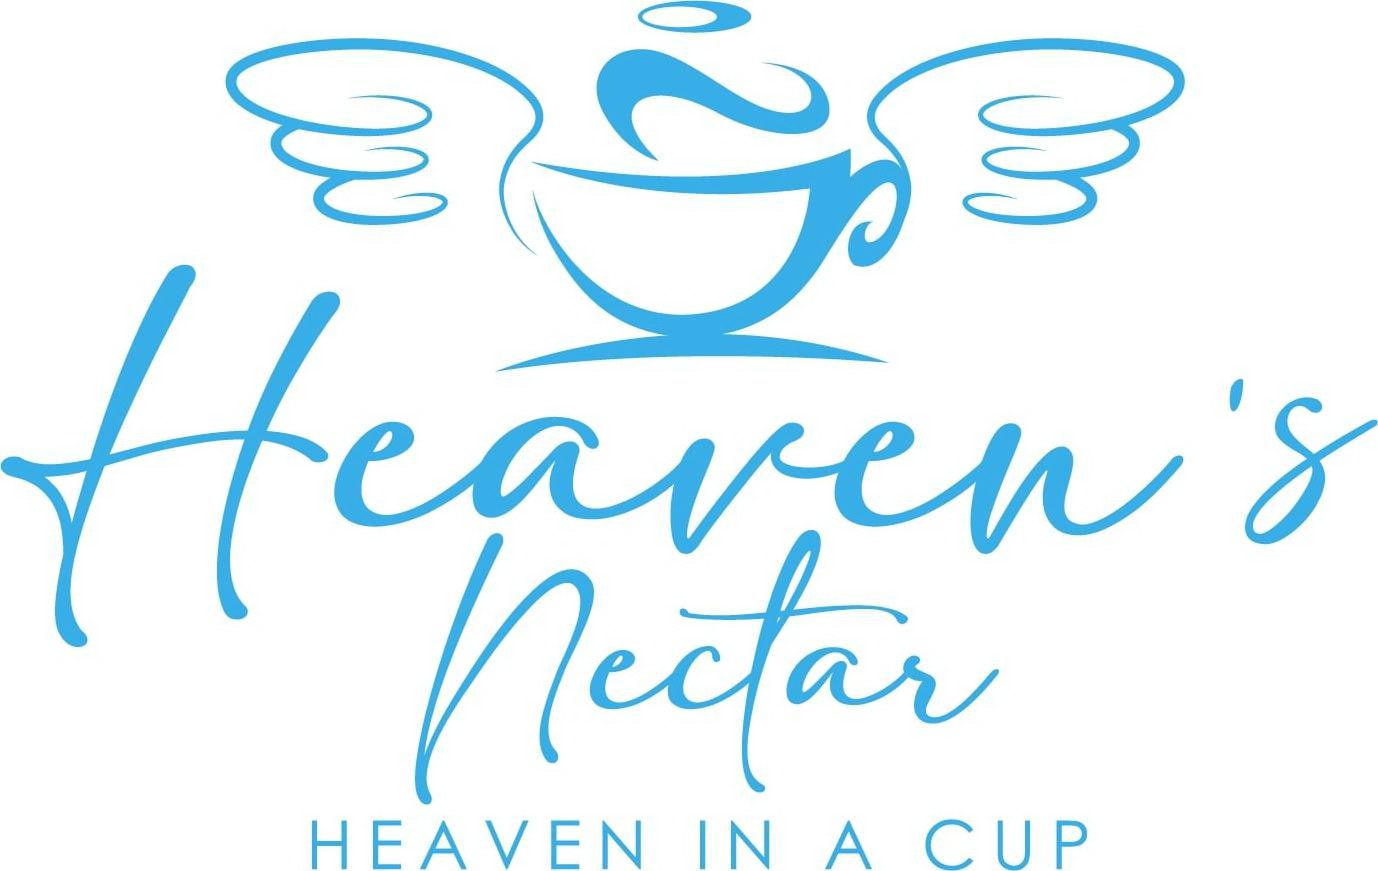  HEAVEN'S NECTAR HEAVEN IN A CUP